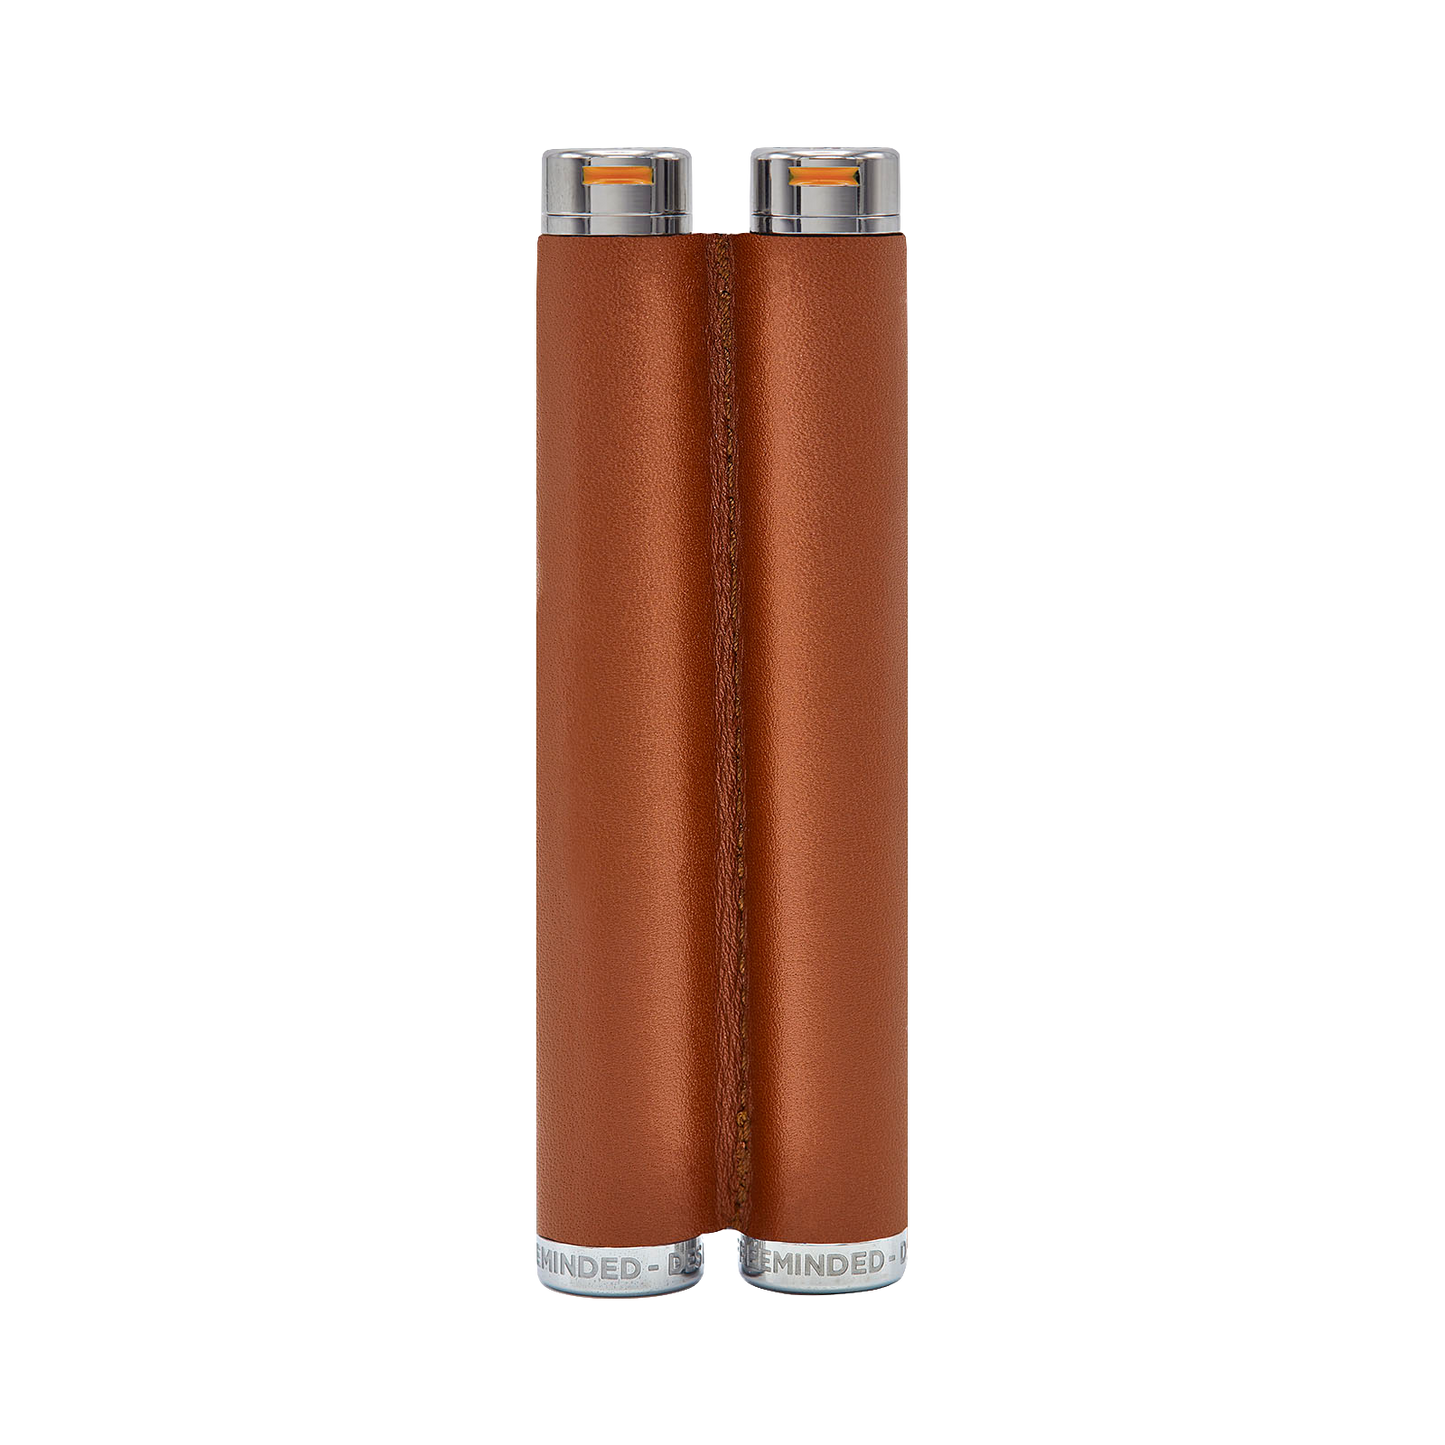 Voyager Cannabis Twin Joint or Blunt Storage Tubes